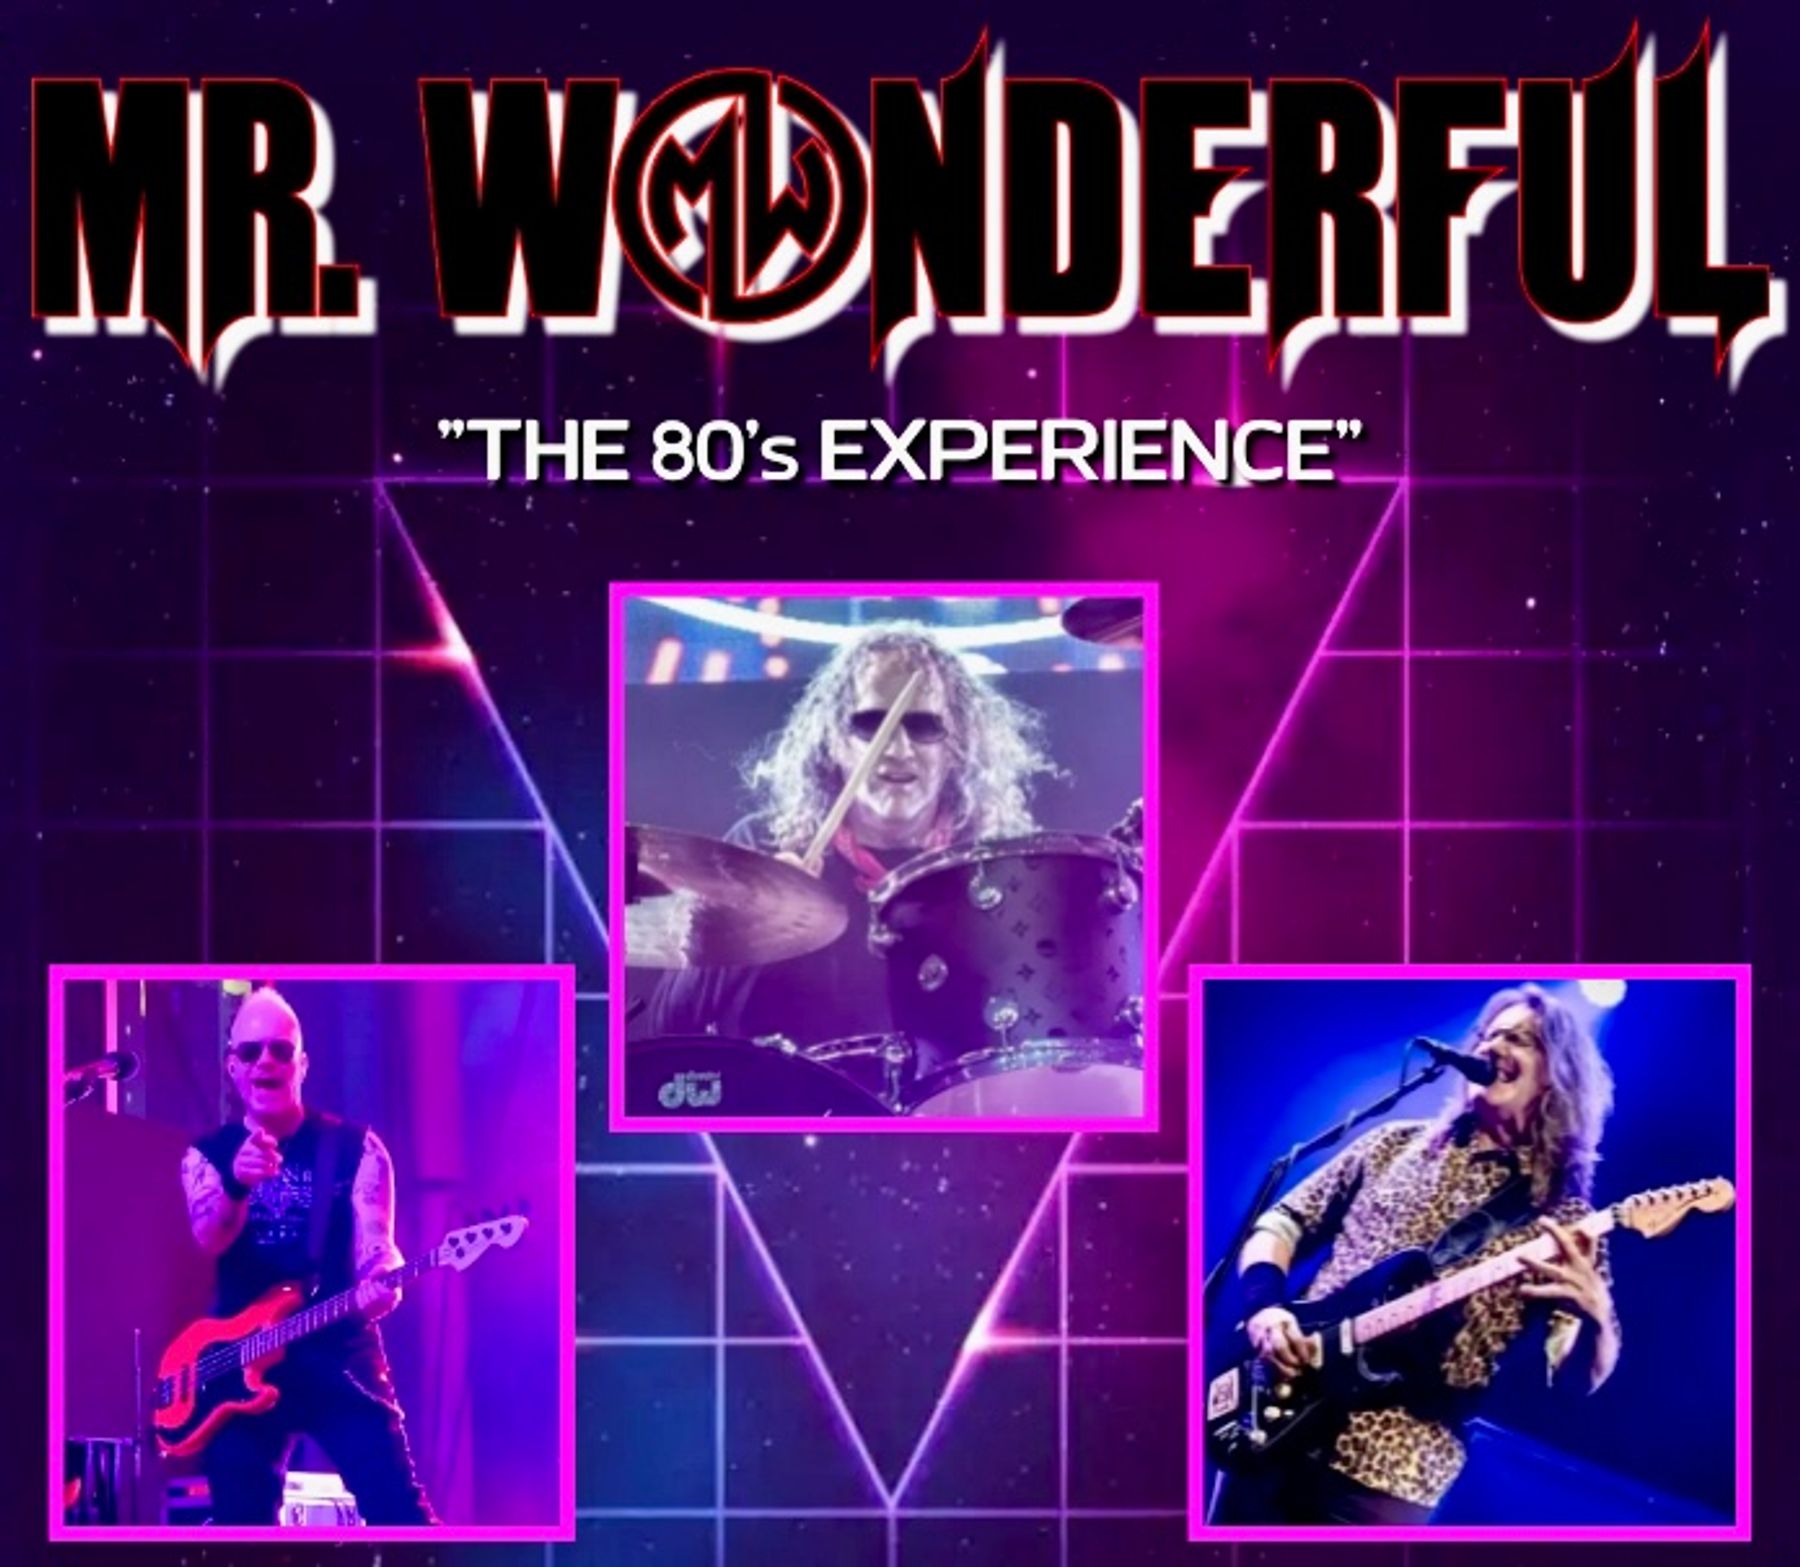 MR. WONDERFUL: The 80's Experience